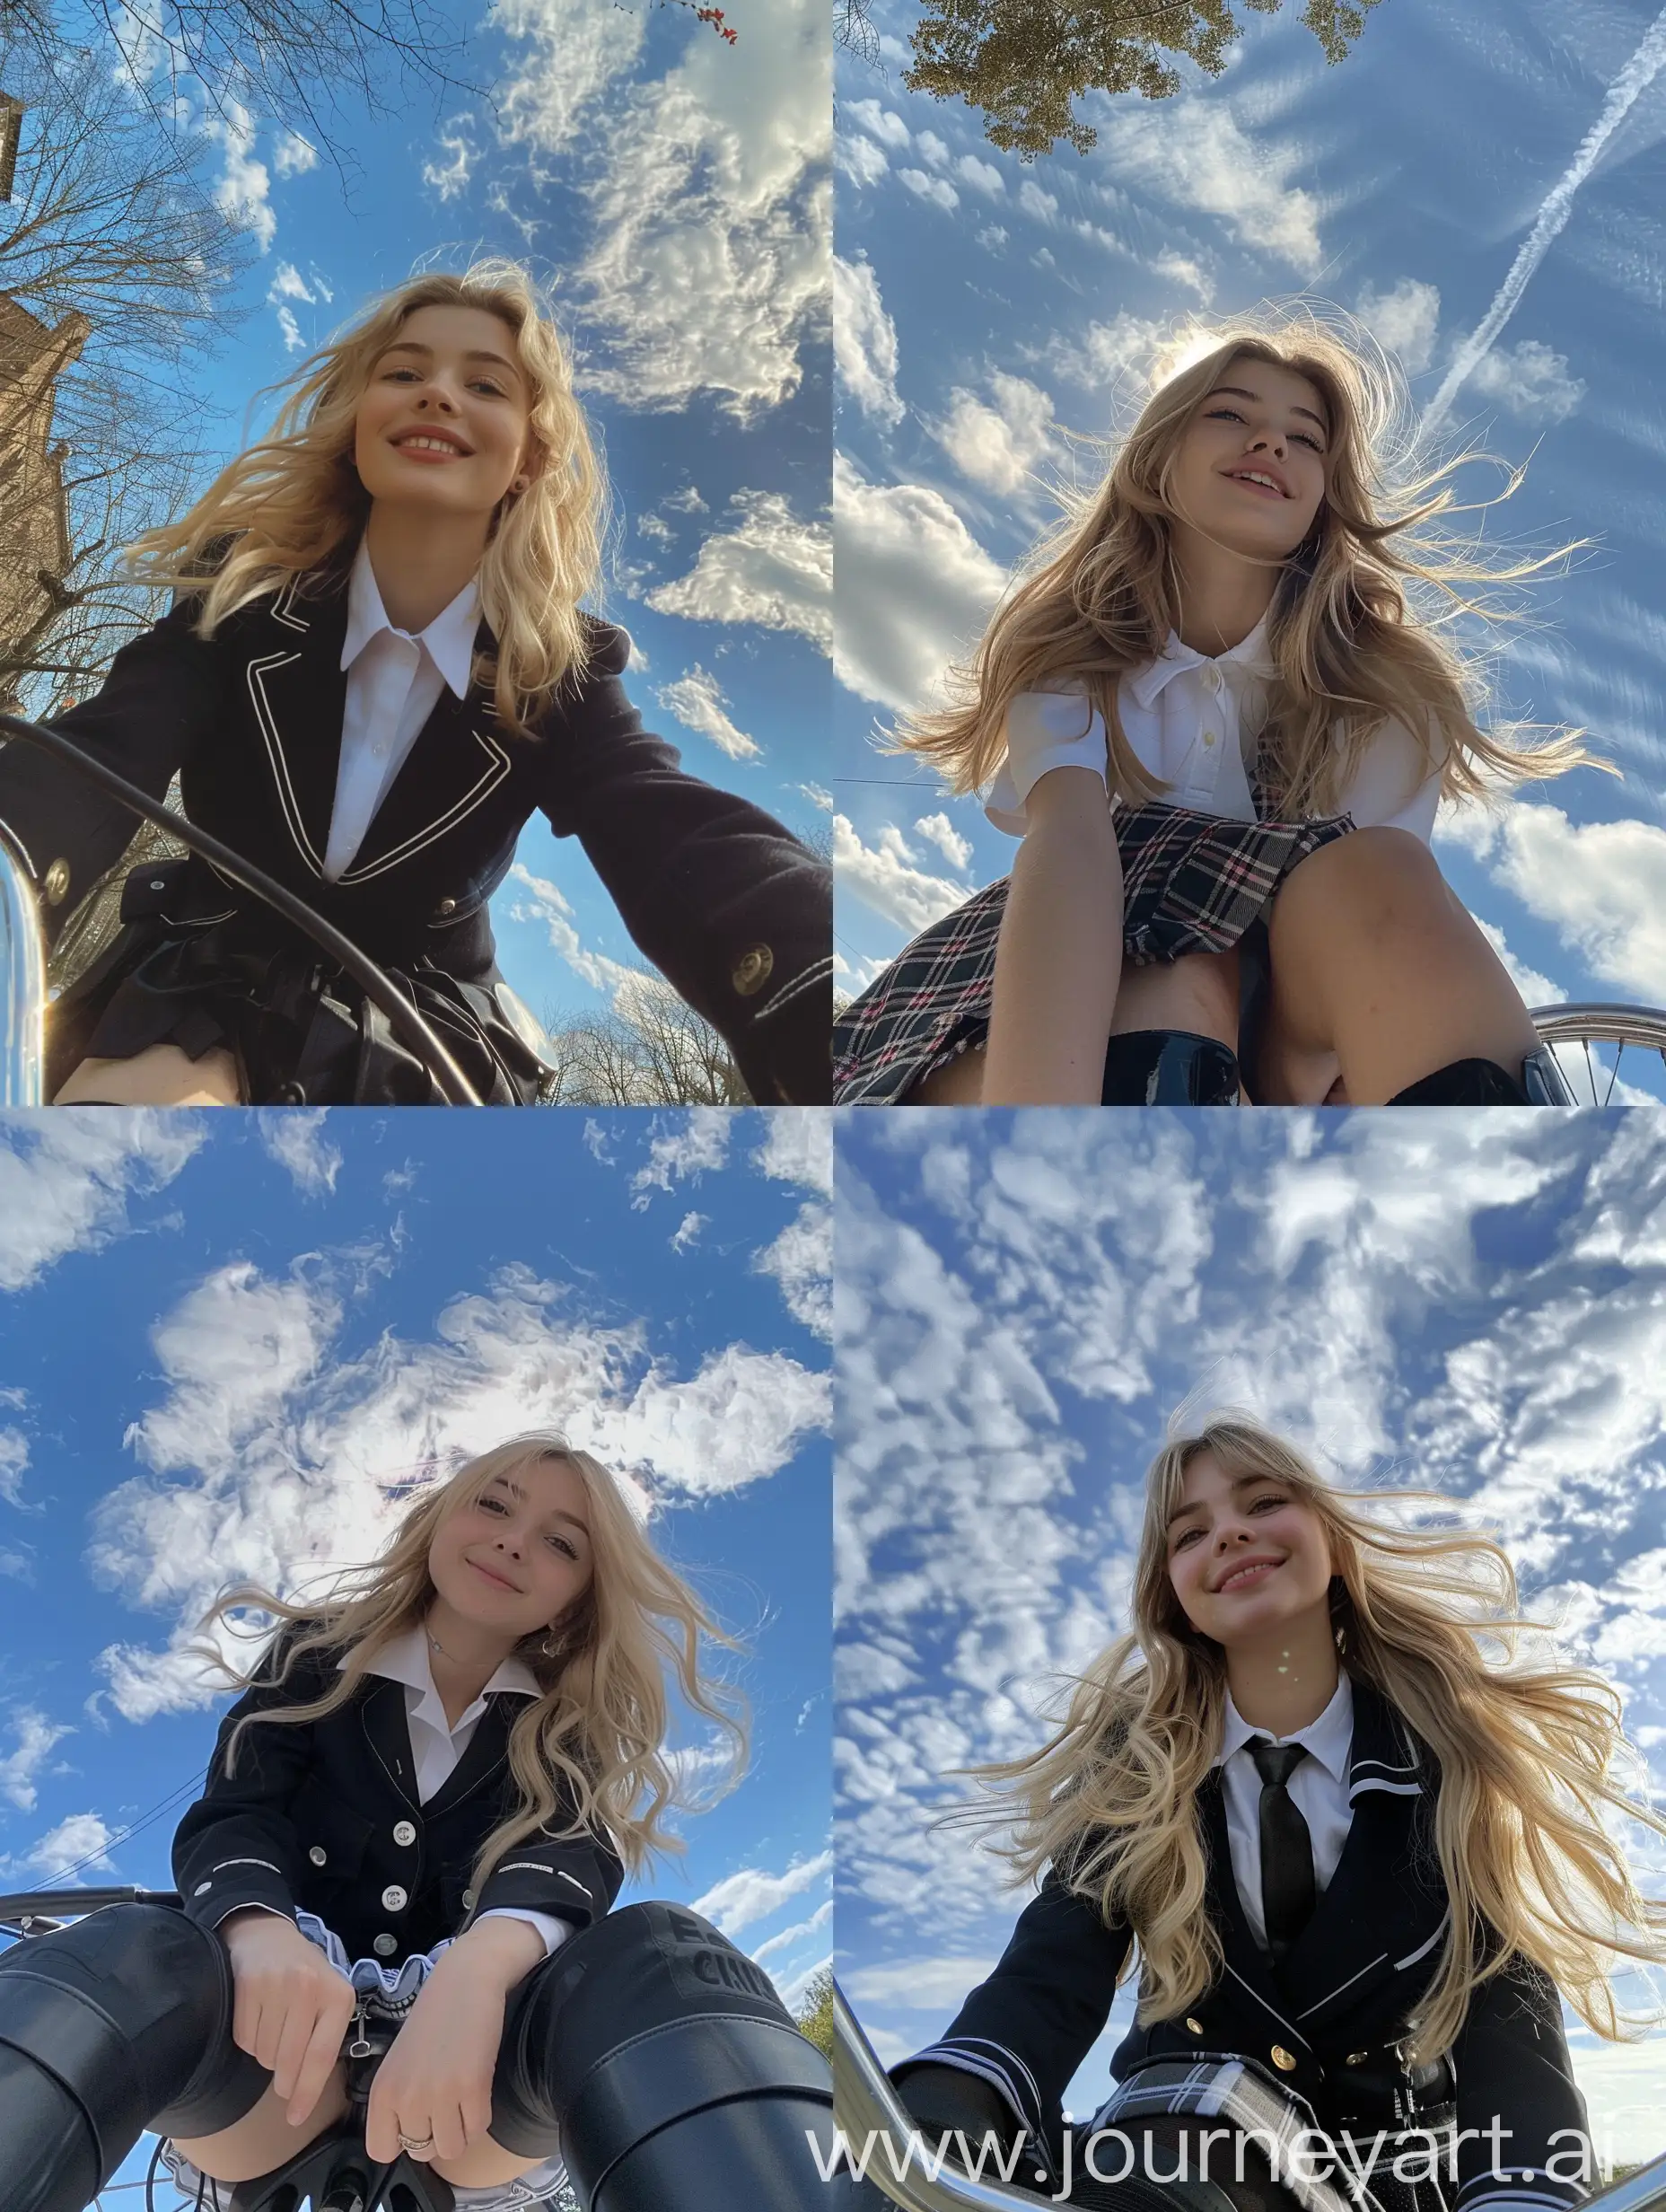 Young-Woman-in-School-Uniform-Smiling-on-Bicycle-Selfie